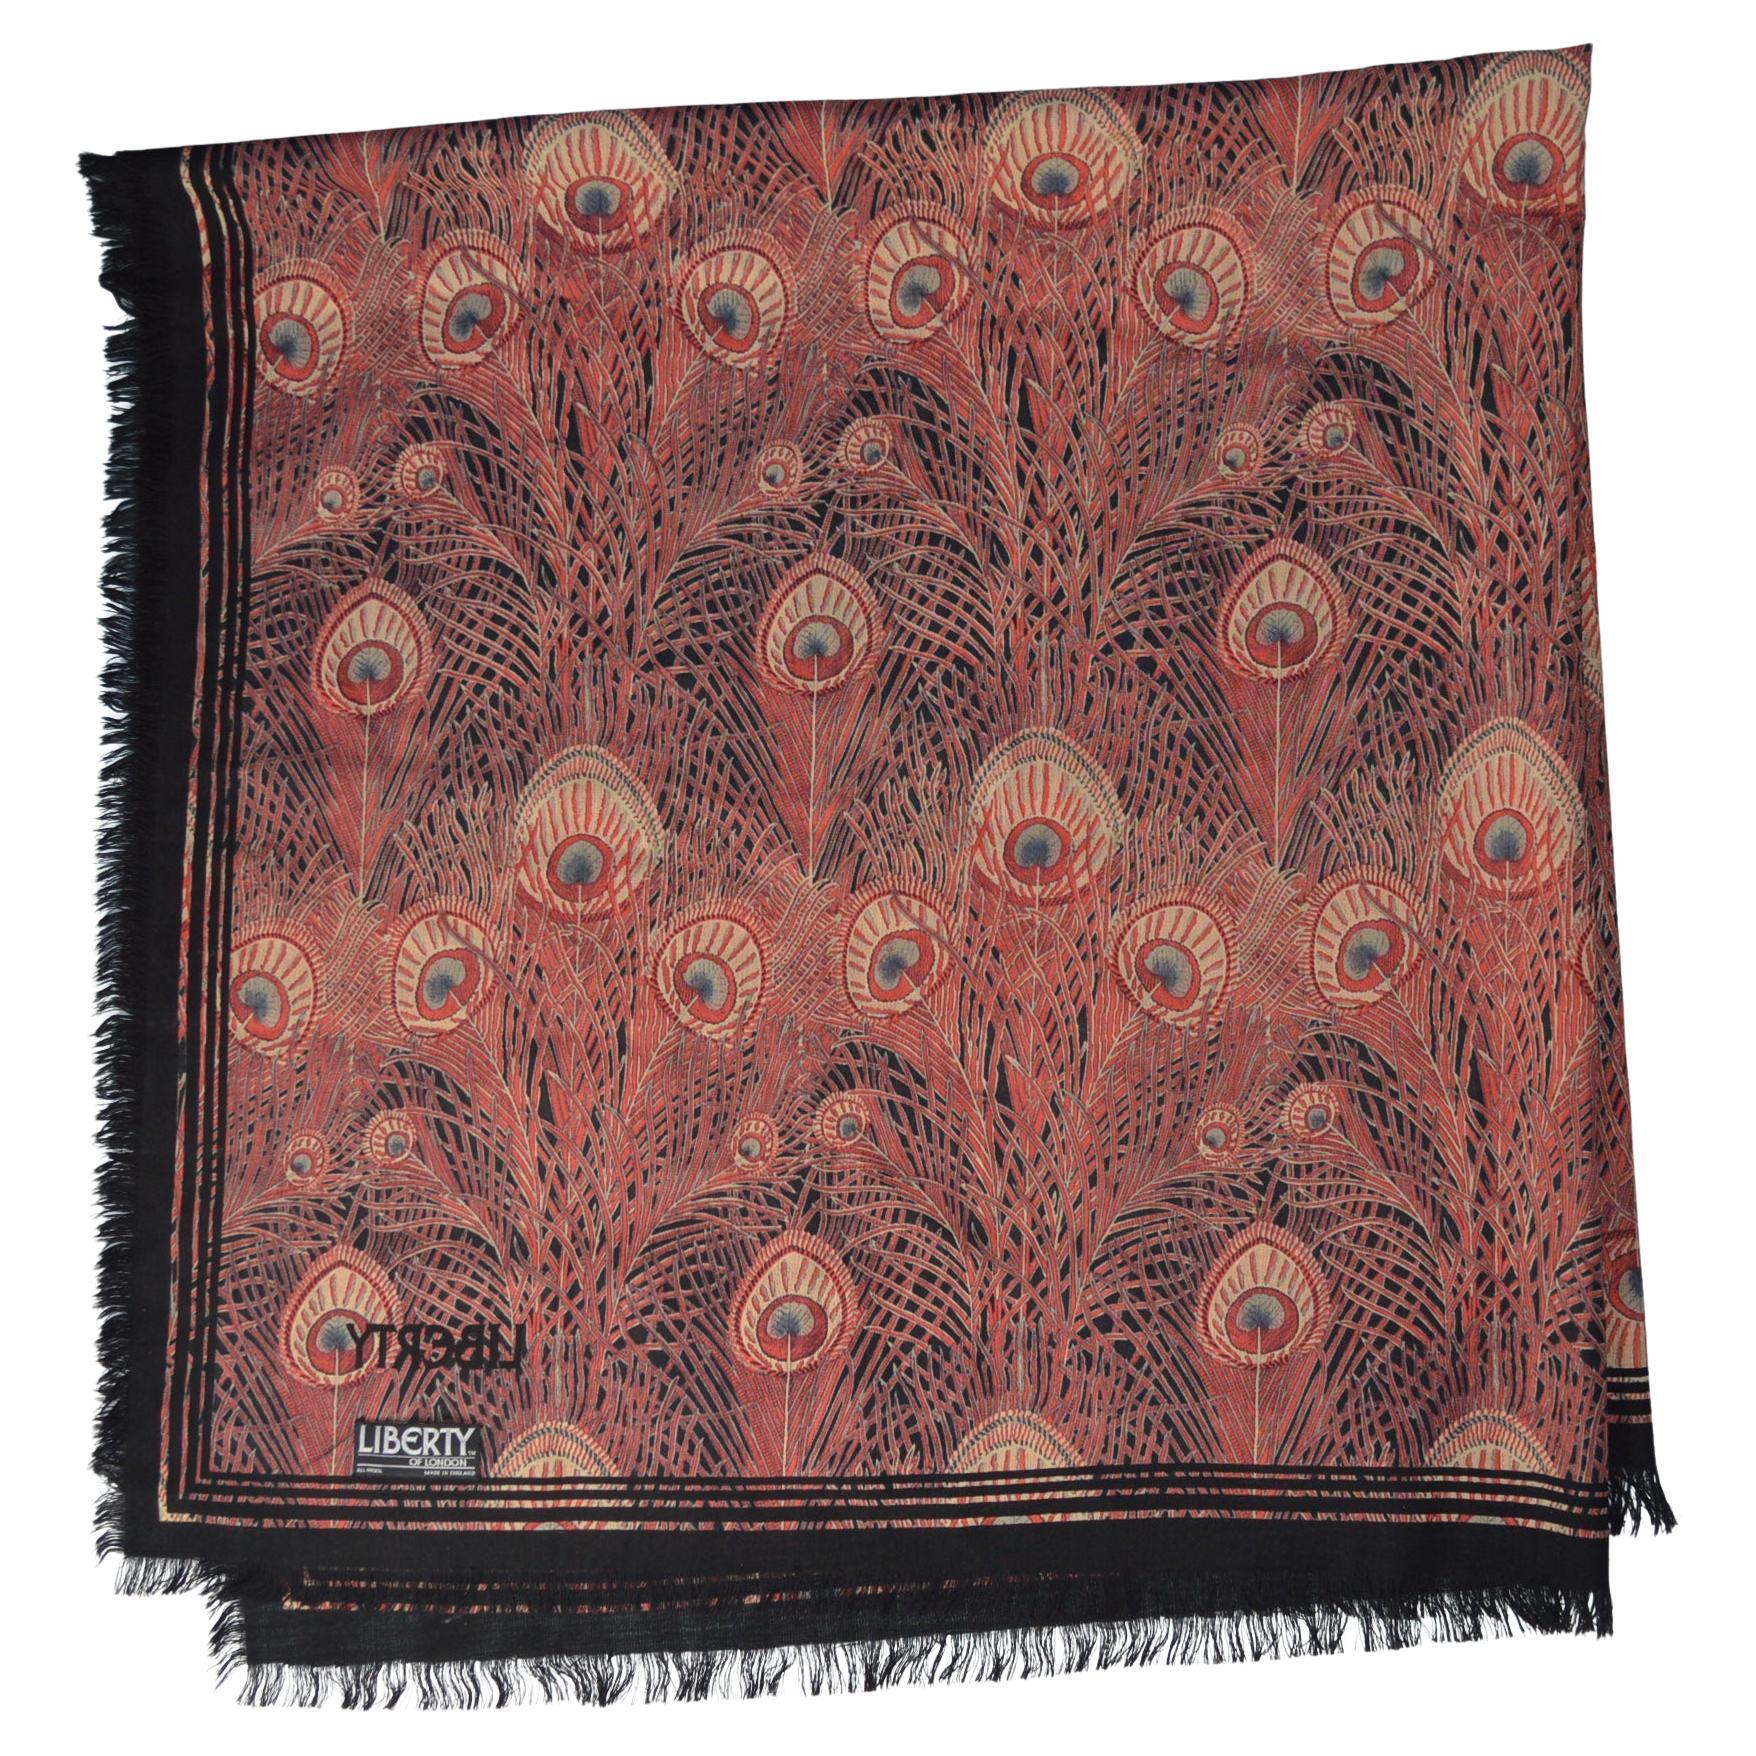 A splendid beautiful large popular Hera peacock design Shawl from Liberty of London with fringed edge in fine Varuna wool, printed in a gorgeous tones of Rust and Browns with peacock feather graphic design. A highly sought after and difficult to